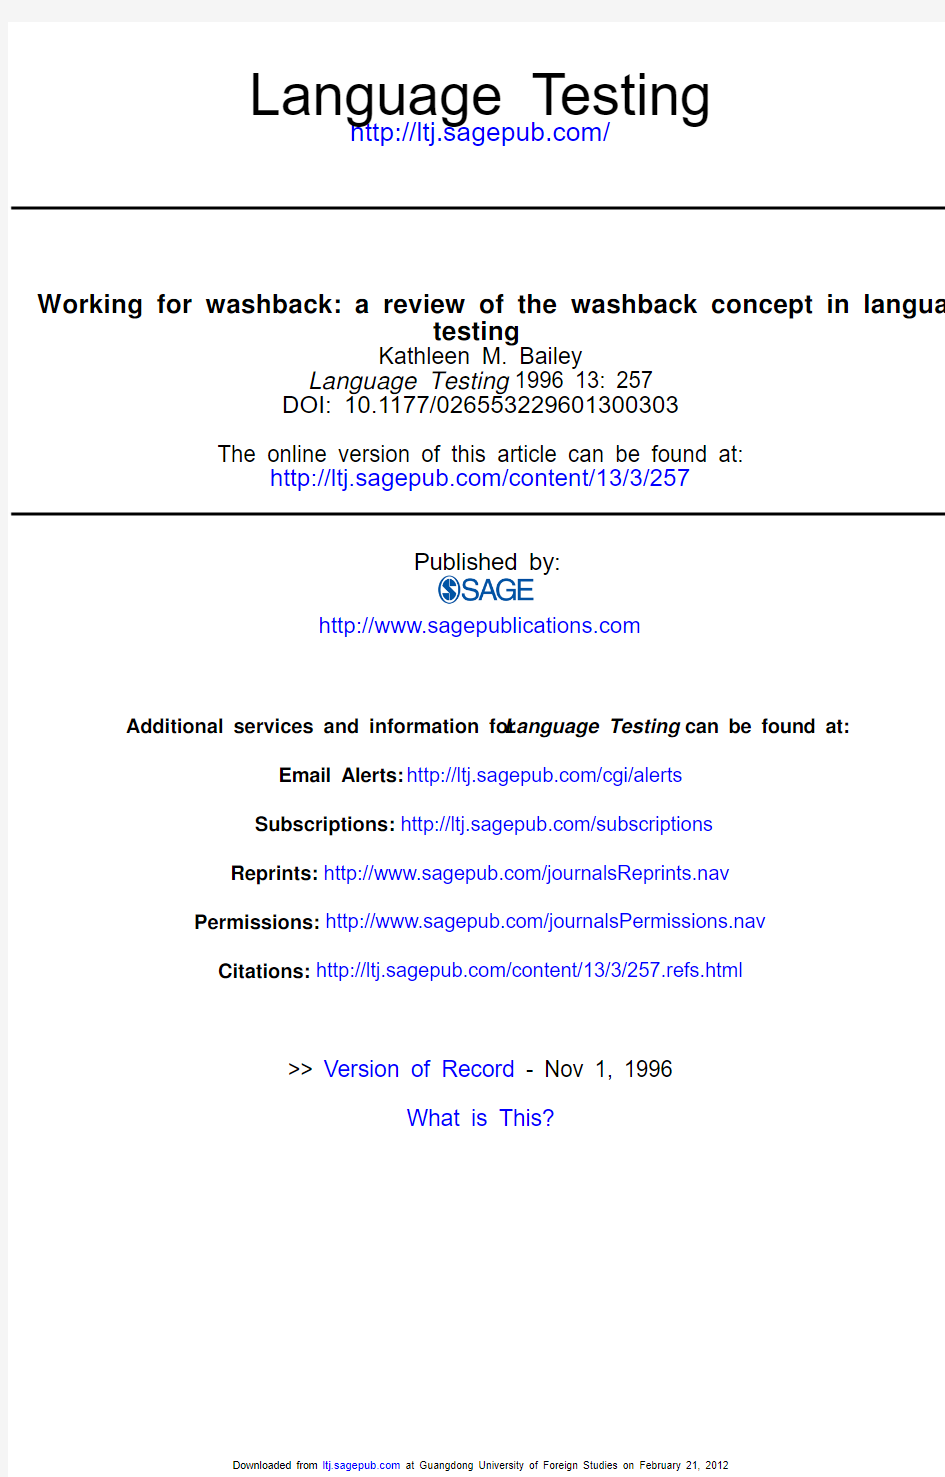 Bailey_1996_Working_for_washback--a_review_of_the_washback_concept_in_language_testing